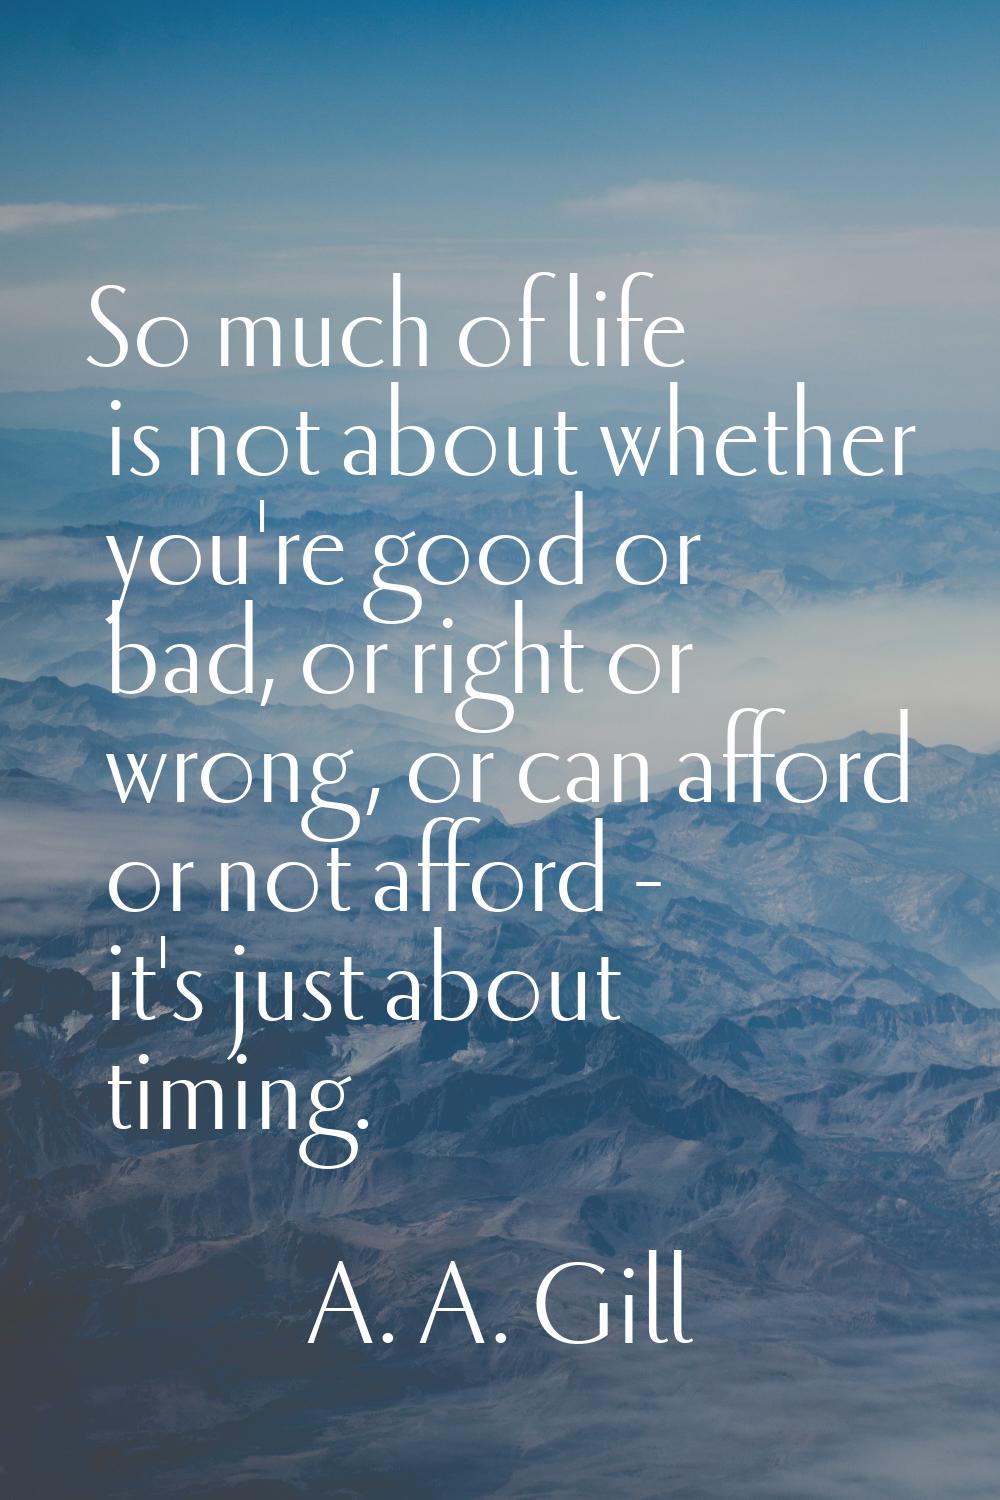 So much of life is not about whether you're good or bad, or right or wrong, or can afford or not af